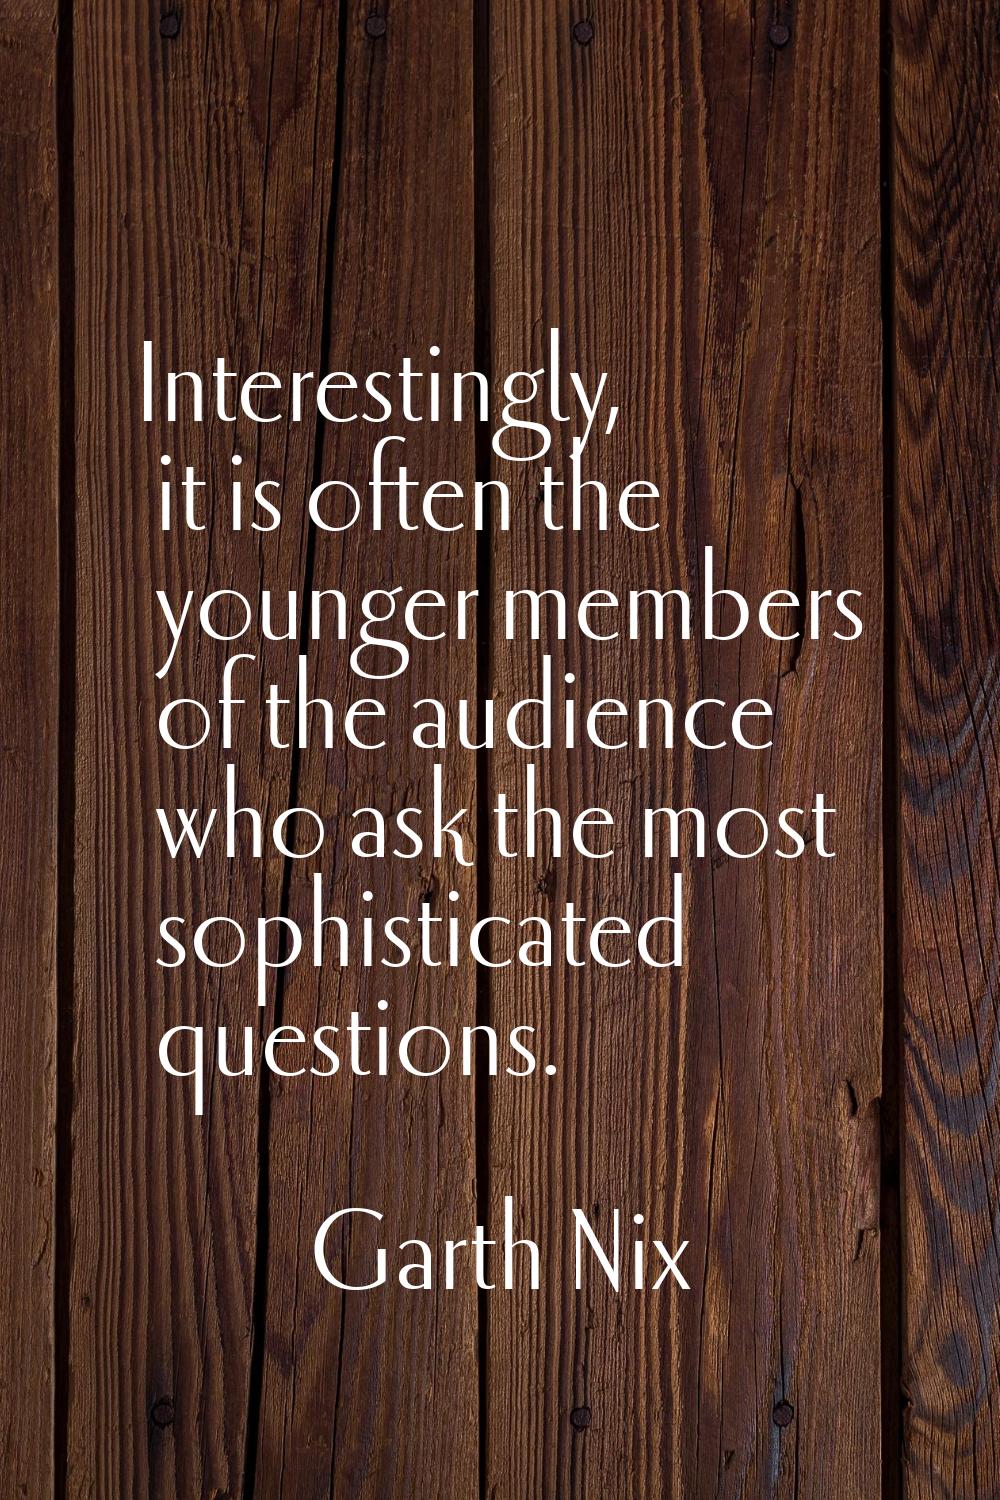 Interestingly, it is often the younger members of the audience who ask the most sophisticated quest